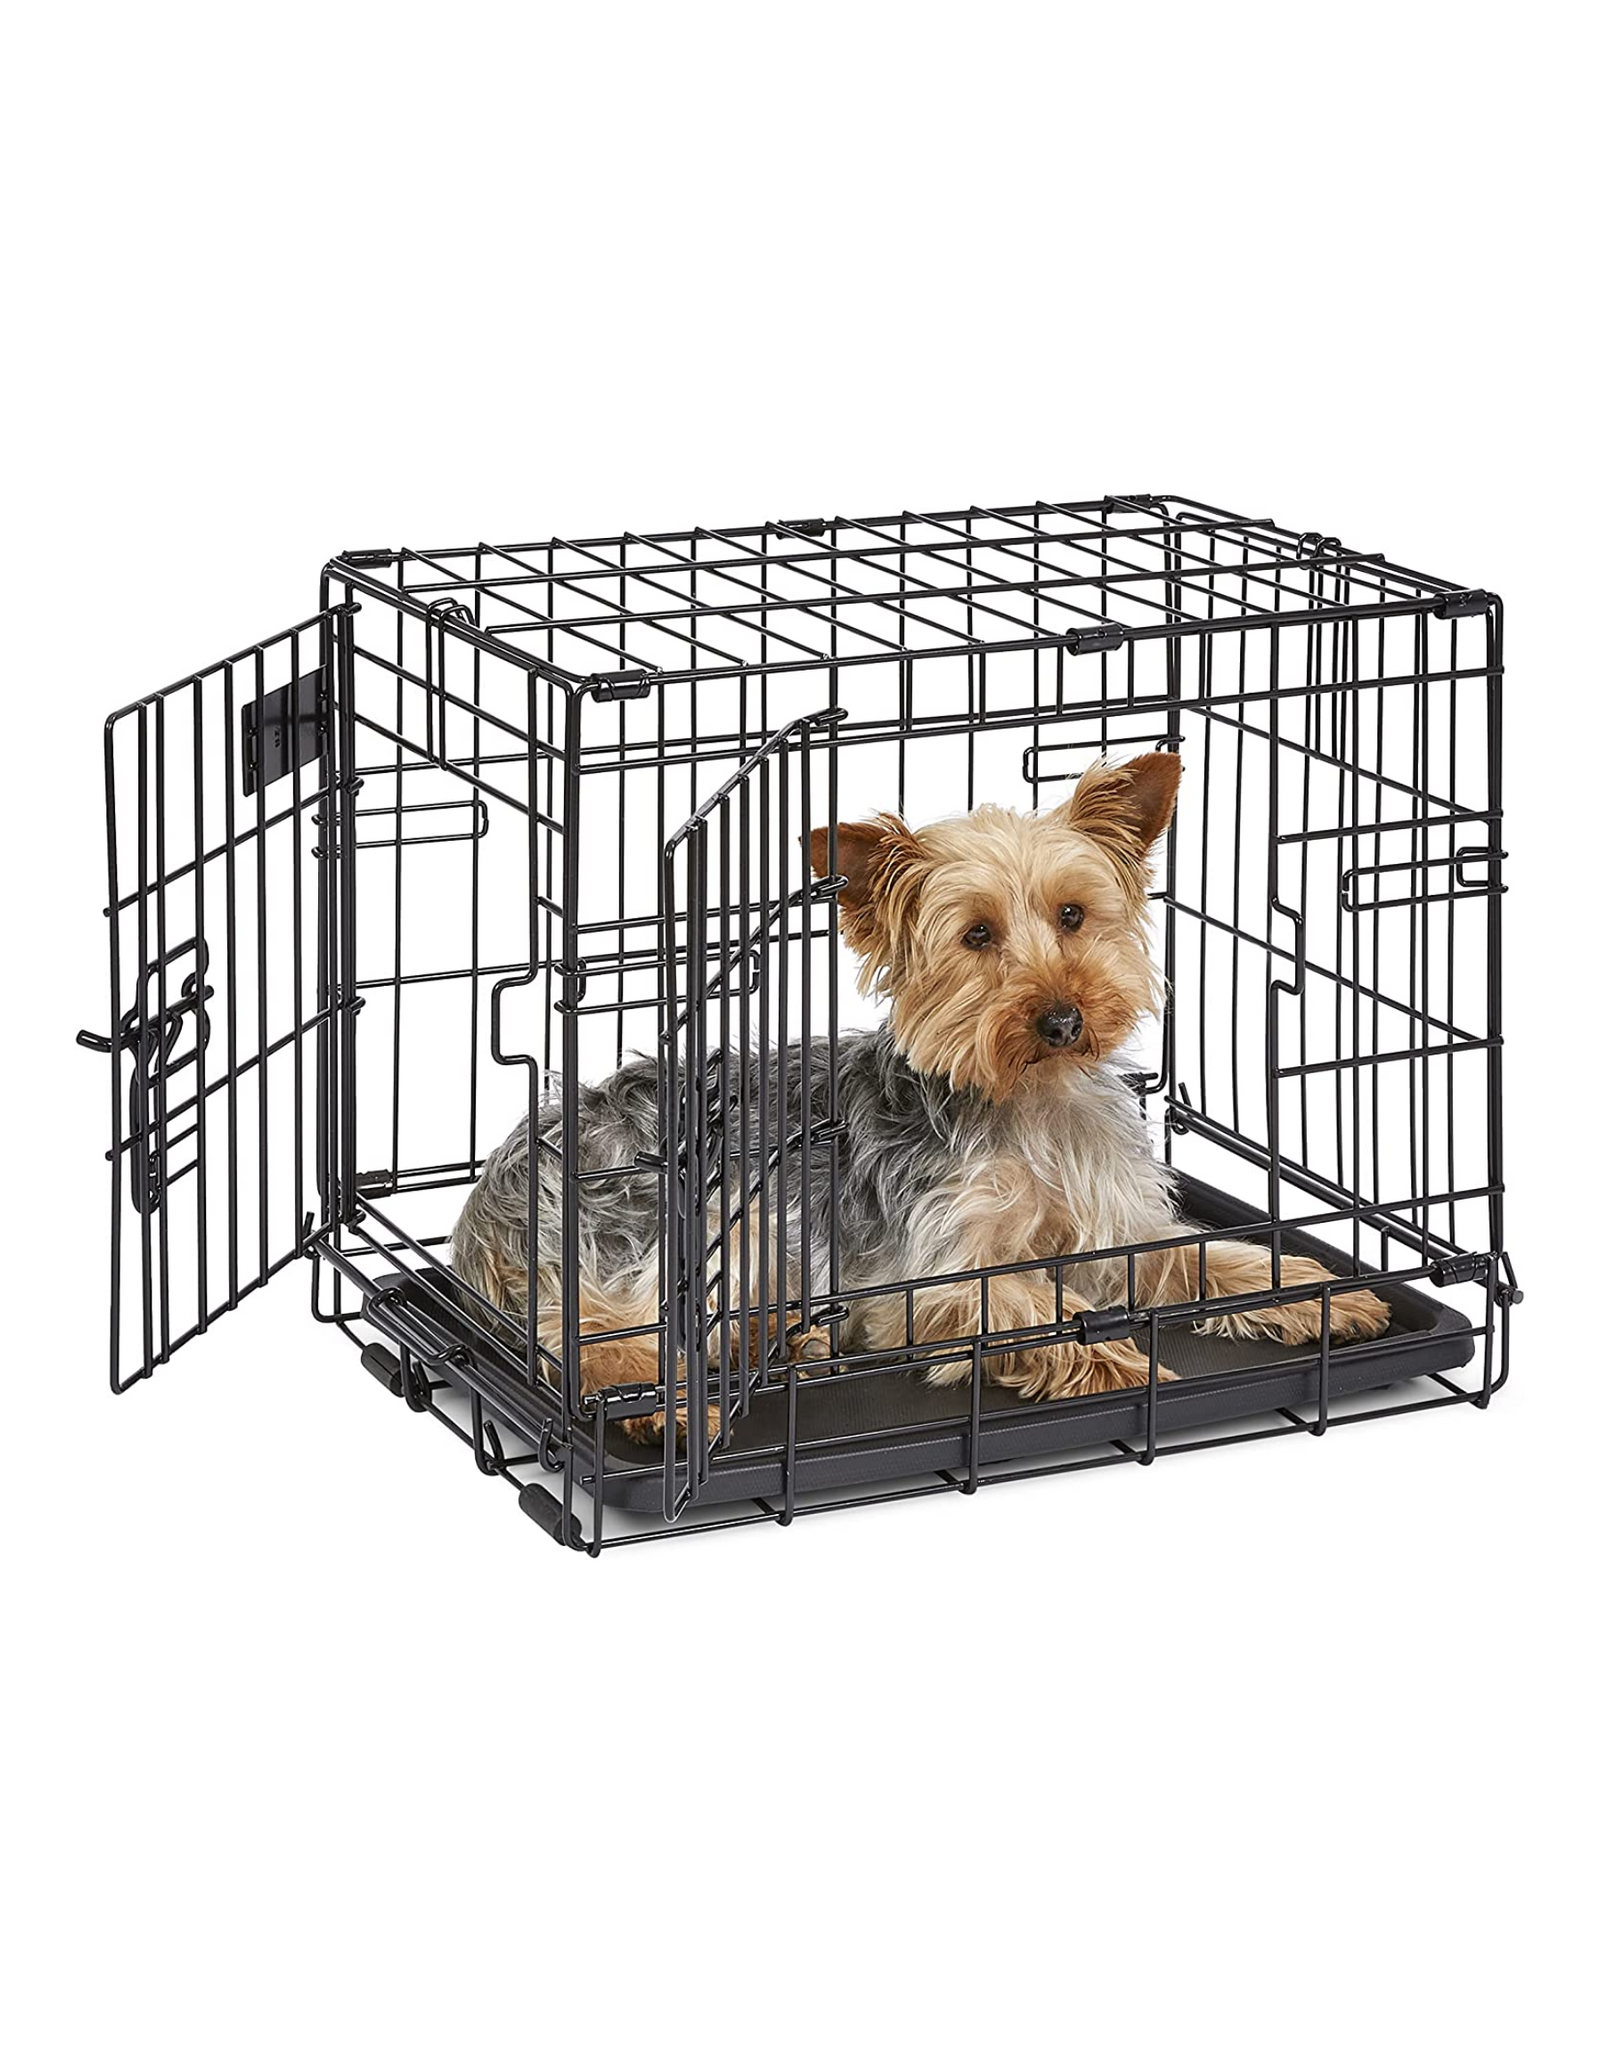  MidWest Homes for Pets Large Dog Crate, MidWest Life Stages  Folding Metal Dog Crate, Divider Panel, Floor Protecting Feet, Leak-Proof  Dog Pan